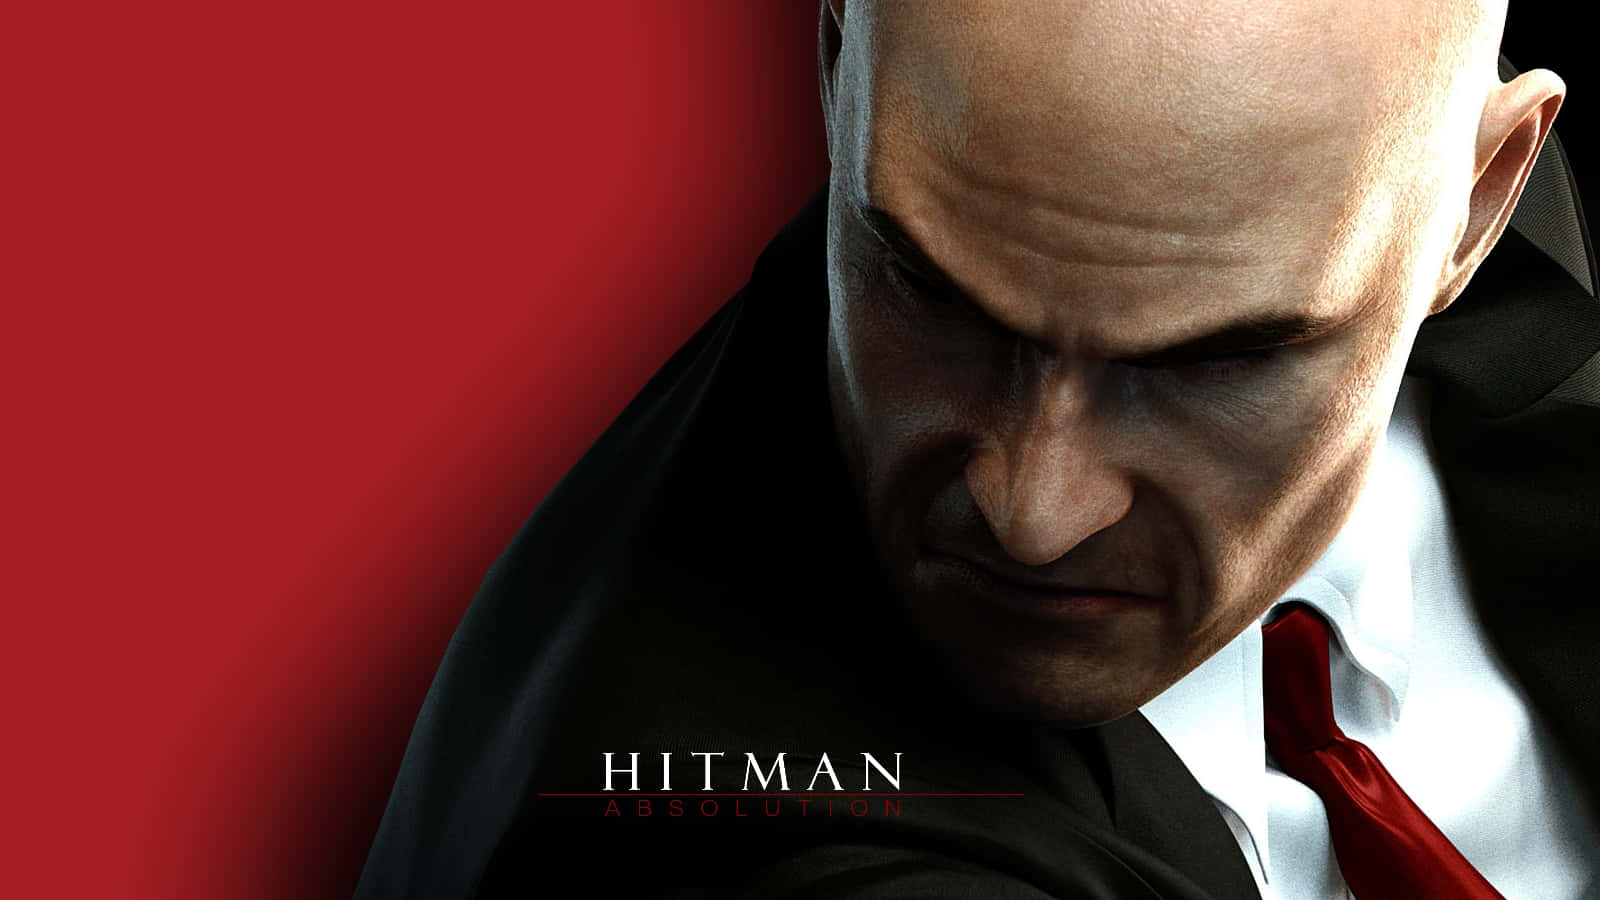 'A Hitman With a Mission - 1080p Hitman Absolution'